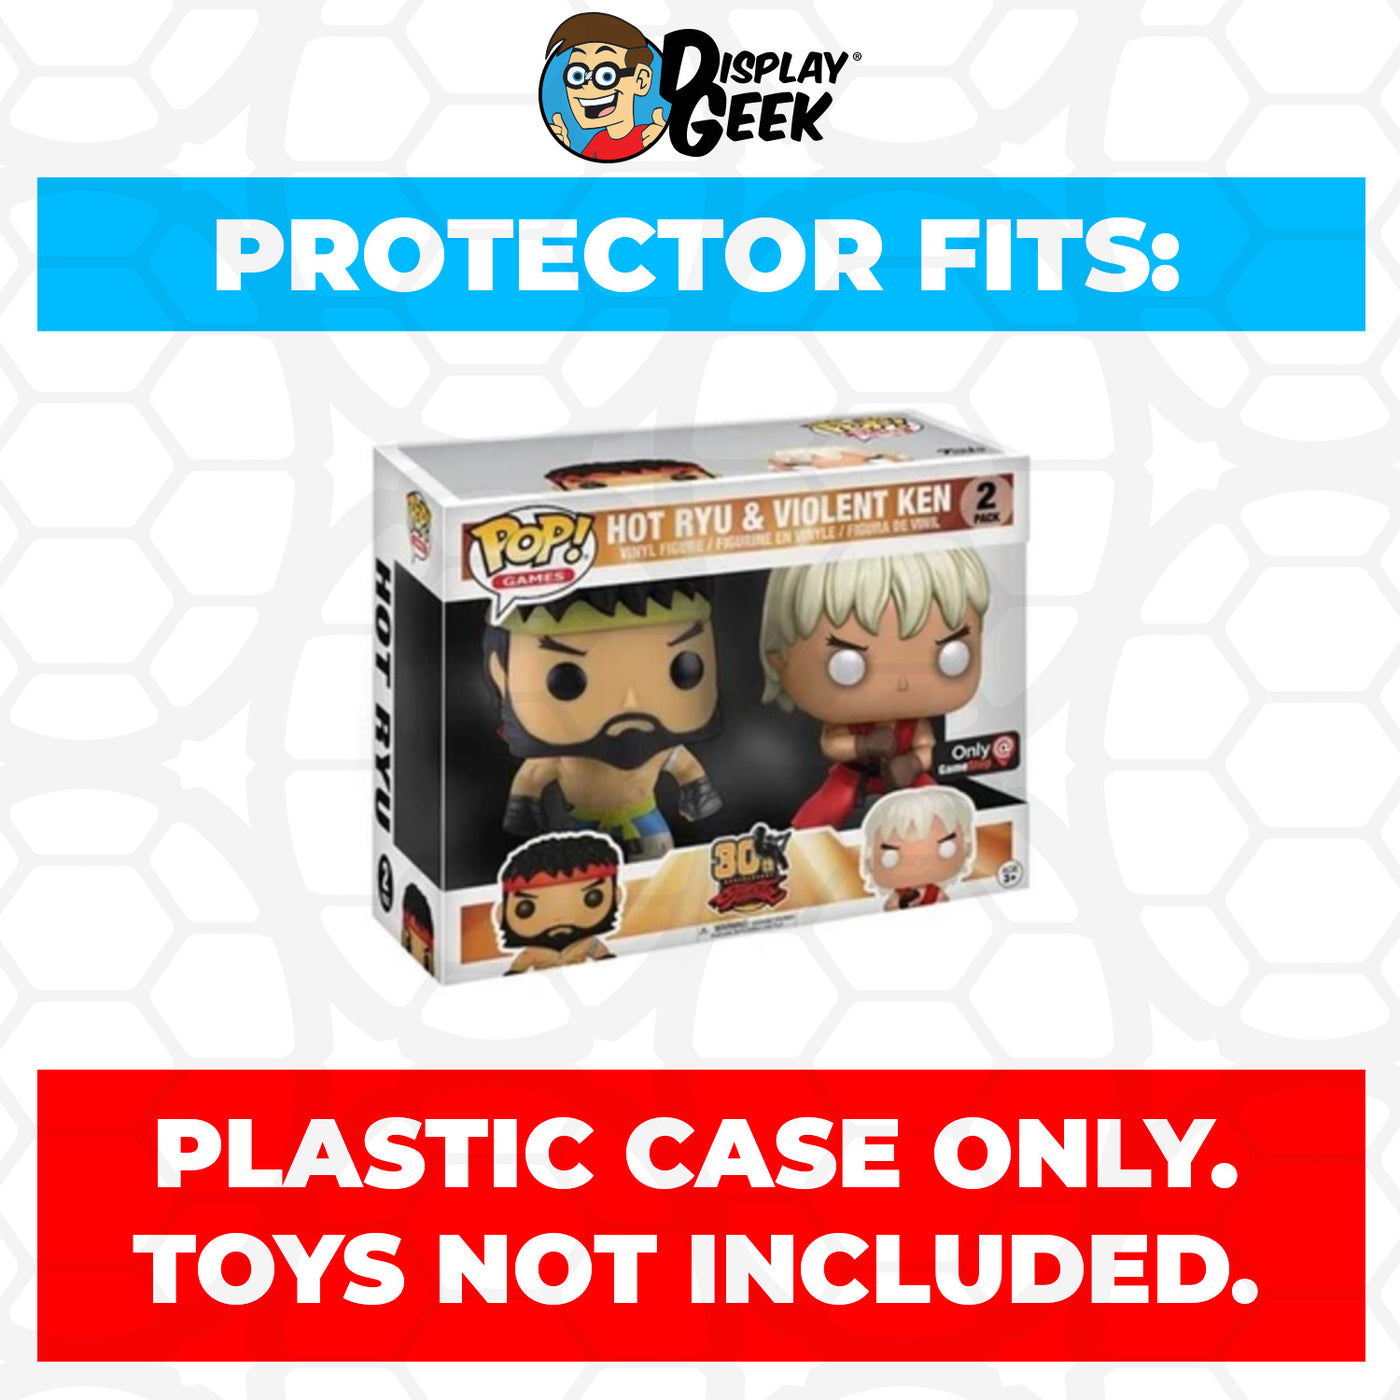 Pop Protector for 2 Pack Hot Ryu & Violent Ken Funko Pop on The Protector Guide App by Display Geek